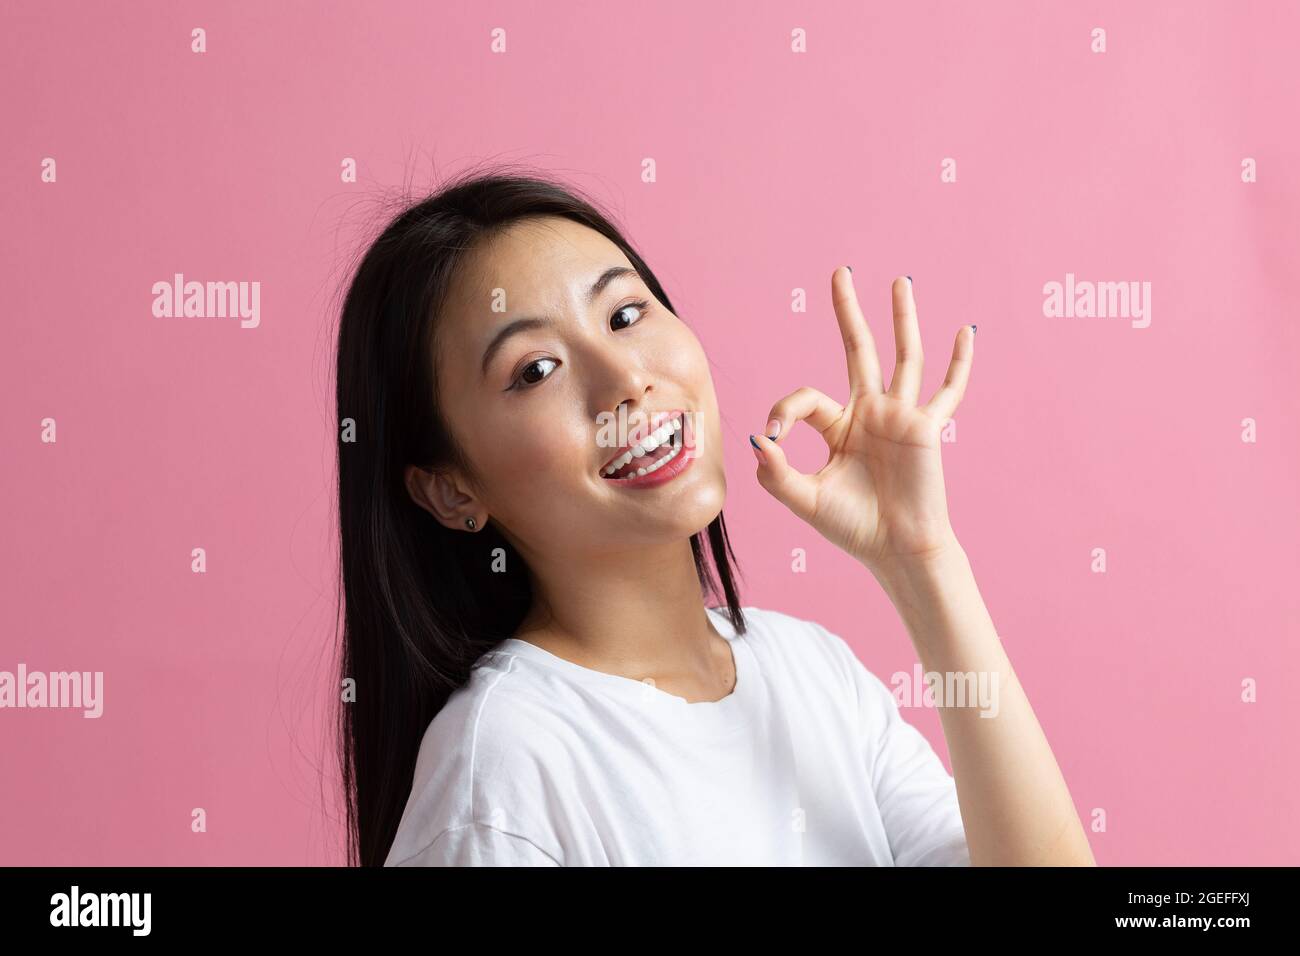 Smiling asian girl showing Ok gesture. Beautiful young woman with dark hair wearing white t-shirt. Female looking at camera isolated on pink background. Studio shoot Stock Photo